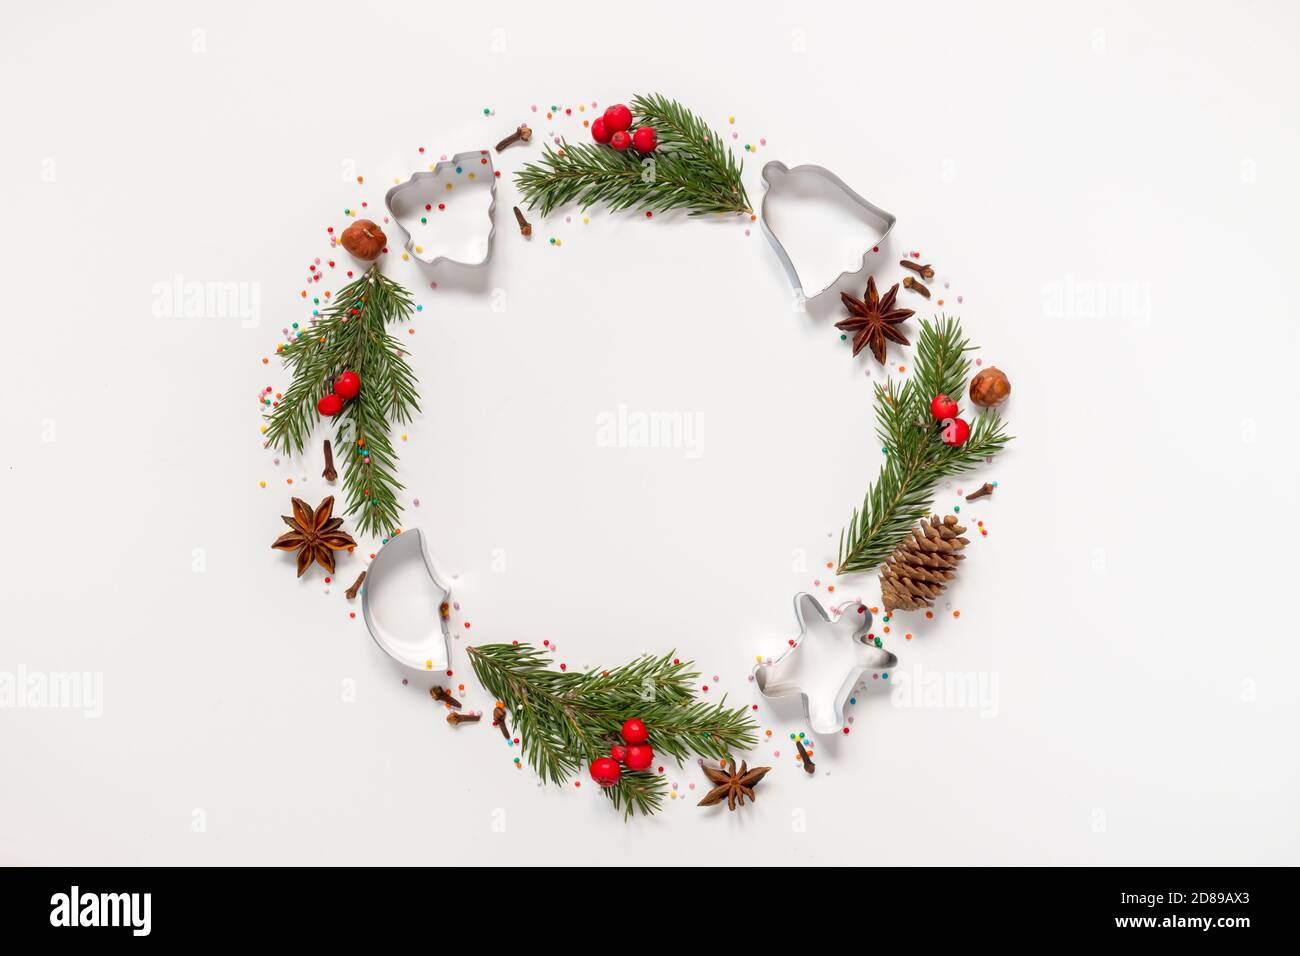 Christmas wreath made from molds for cookies, spices and a Christmas tree on a white background with copy space Stock Photo